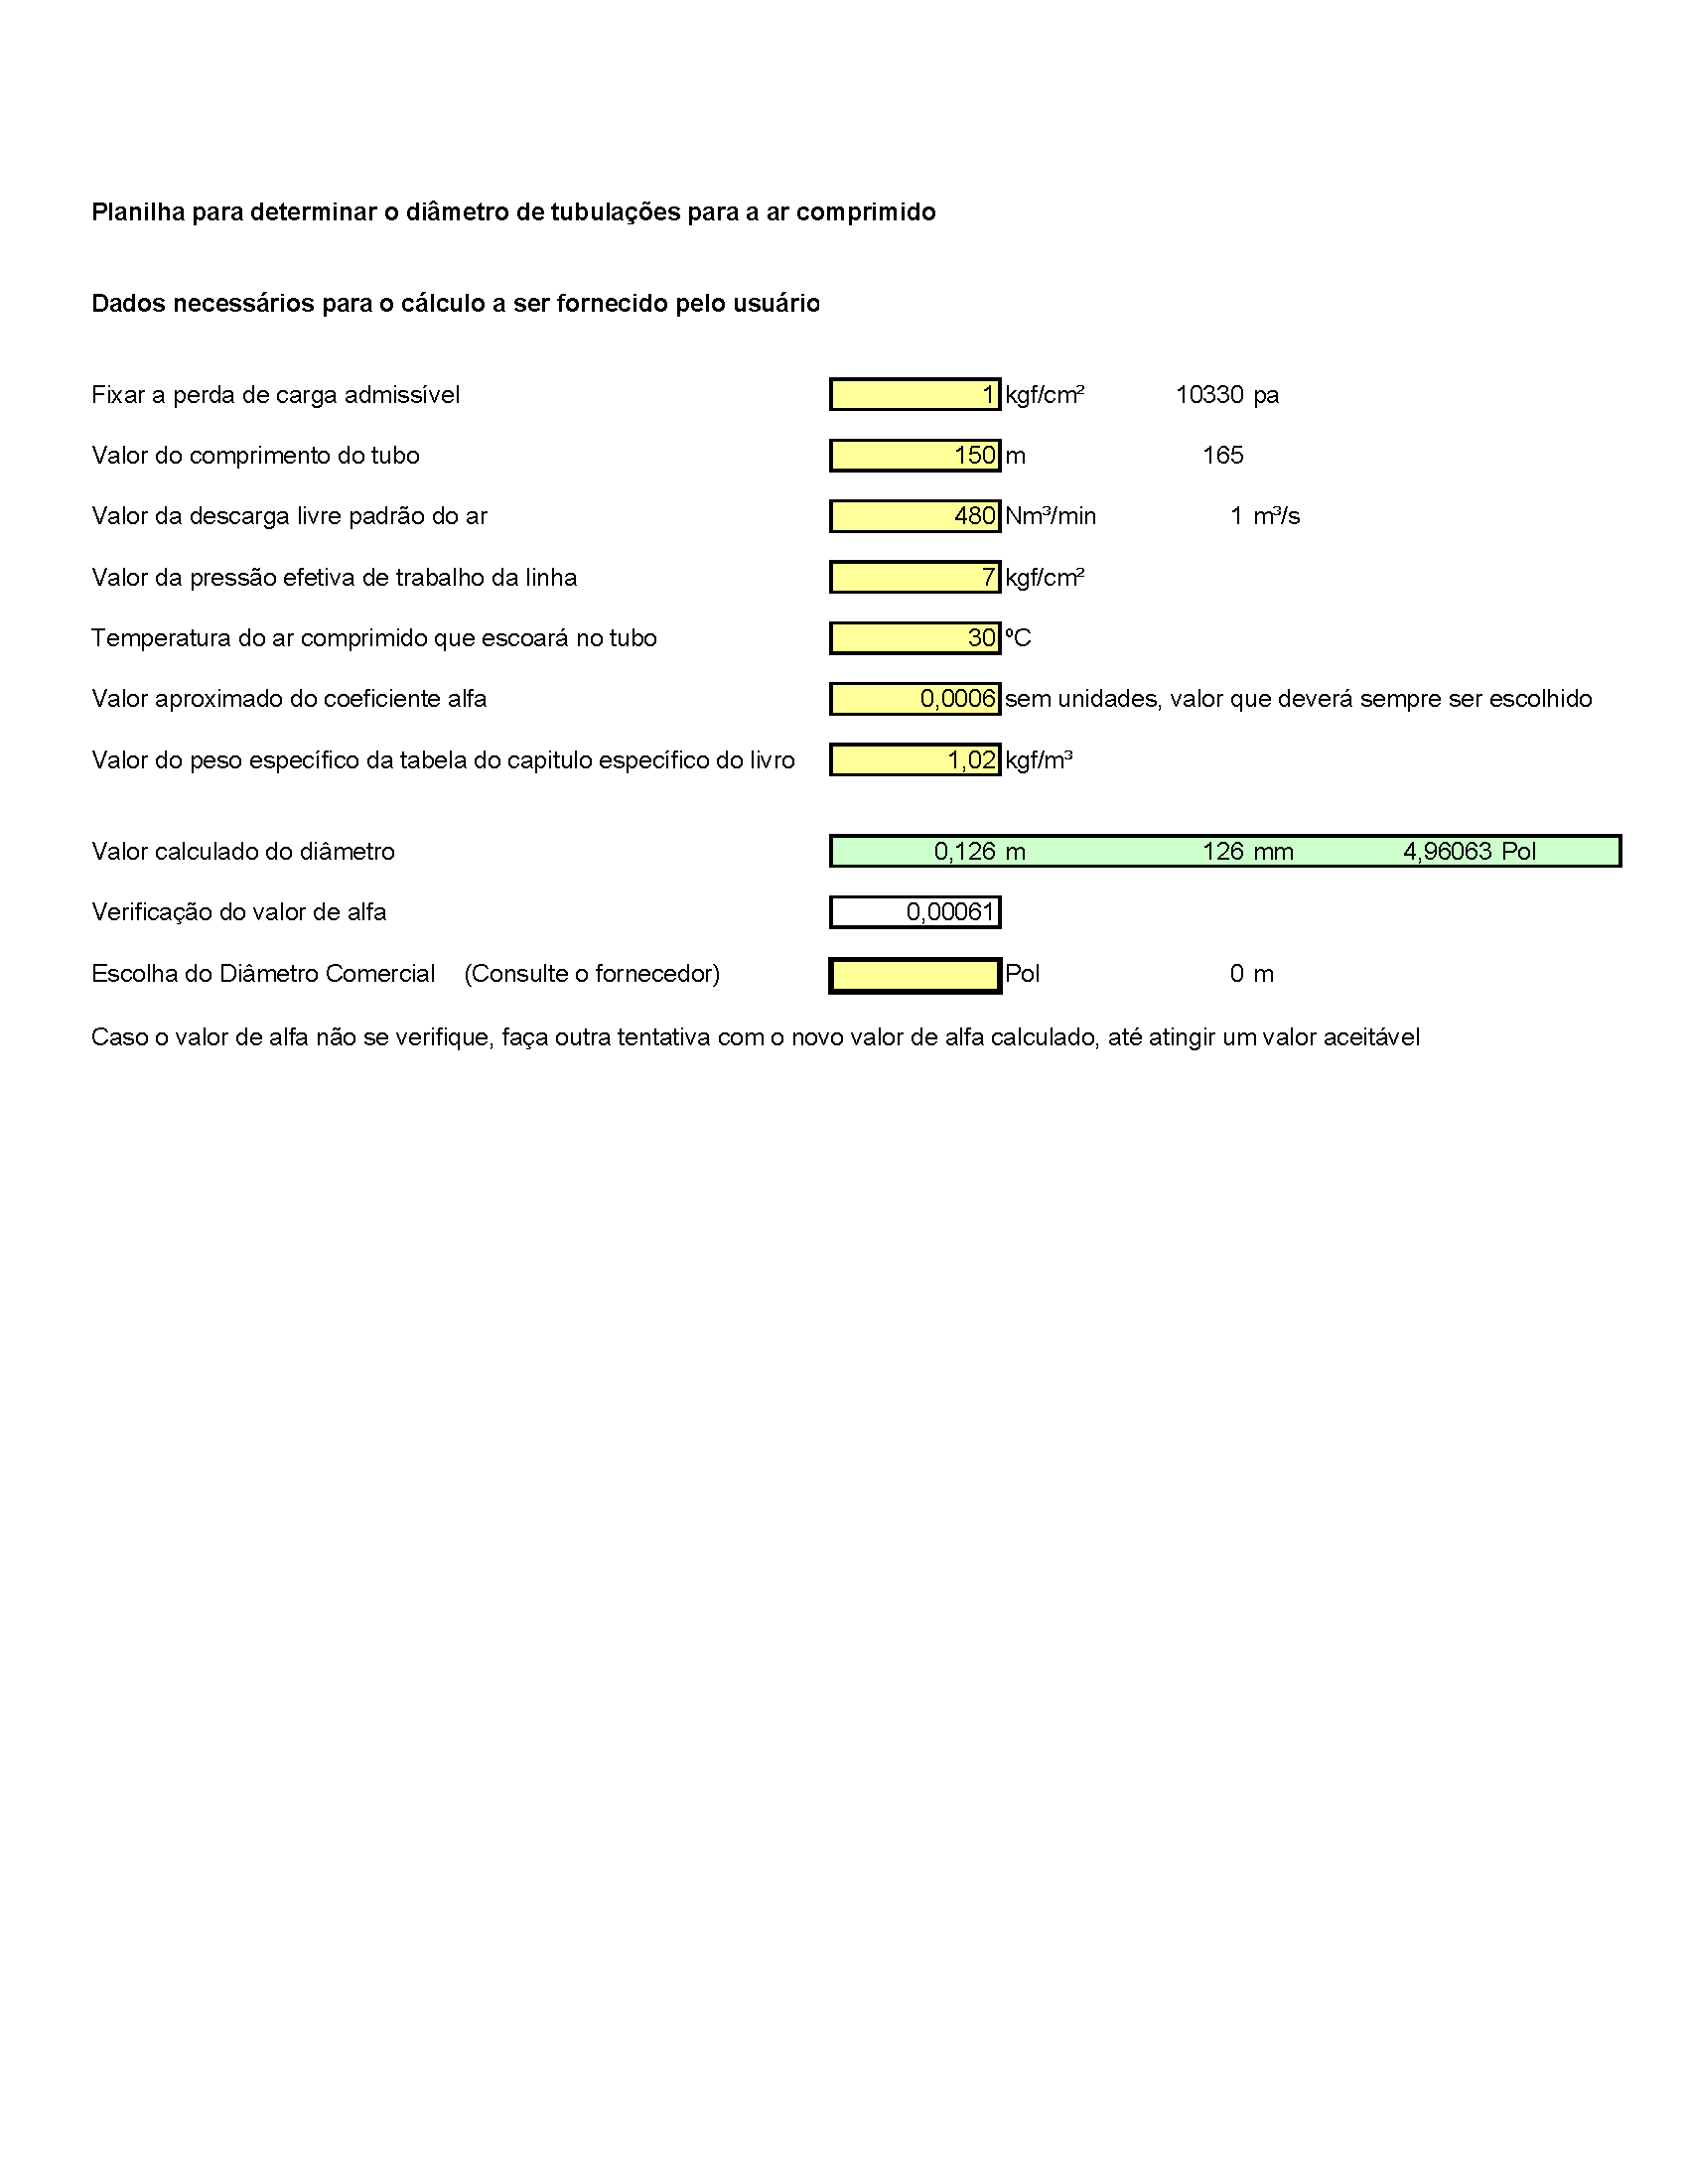 N2 Calculation Spreadsheets: Worksheet for calculating the diameter of compressed air pipes